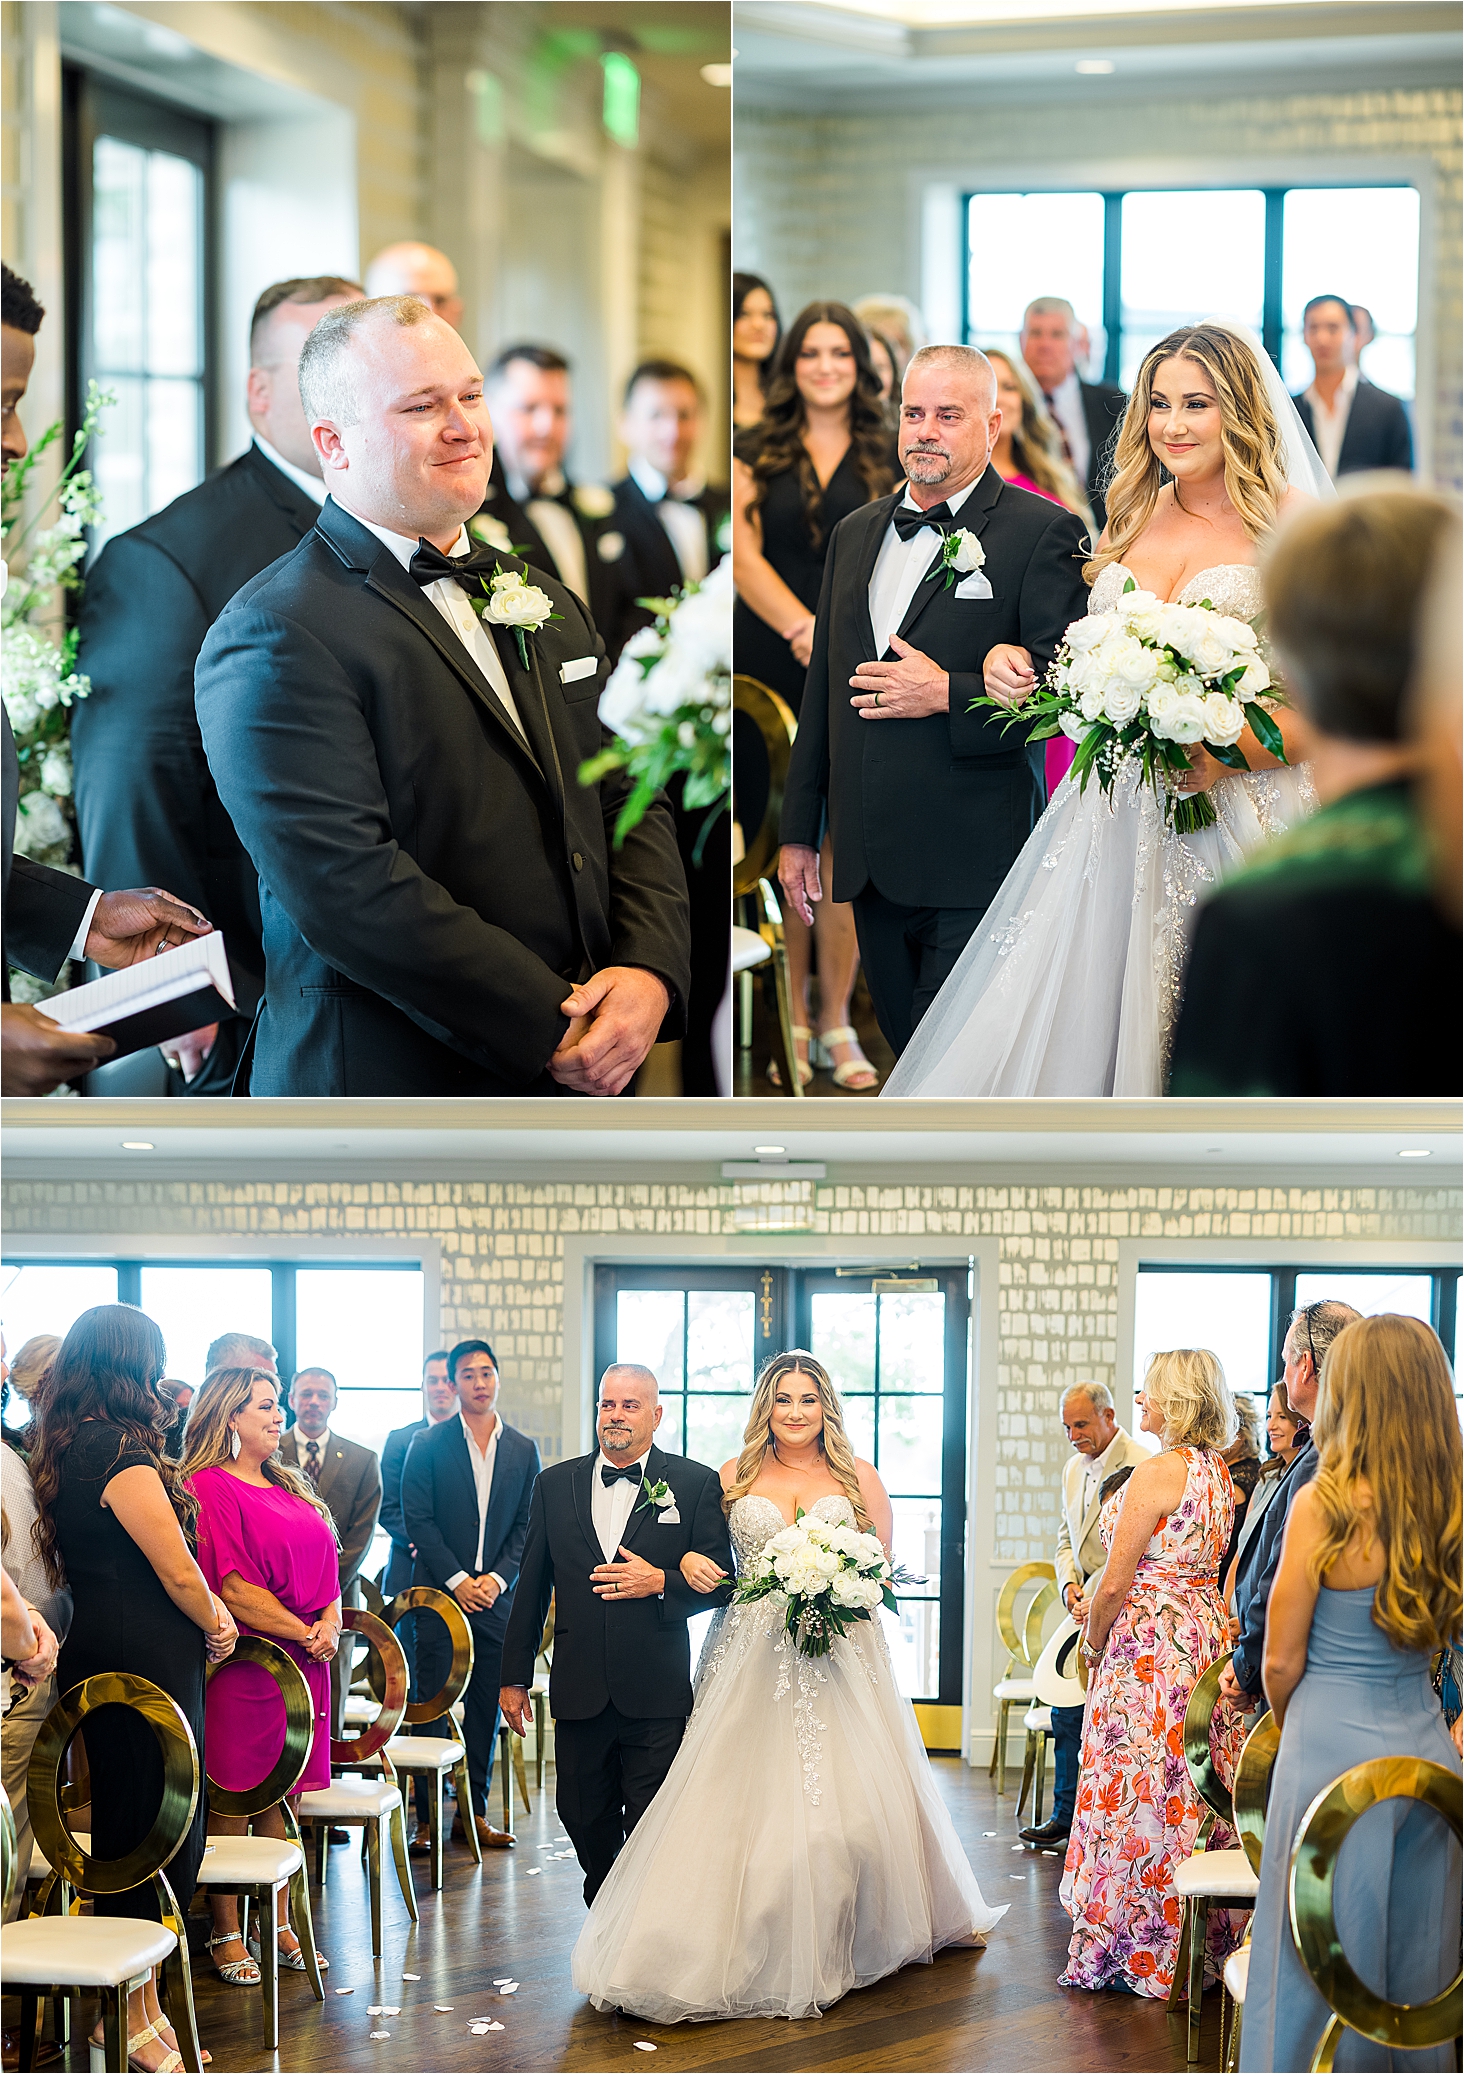 A groom sees his bride down the aisle for the first time at The Redberry Estate in San Antonio, Texas